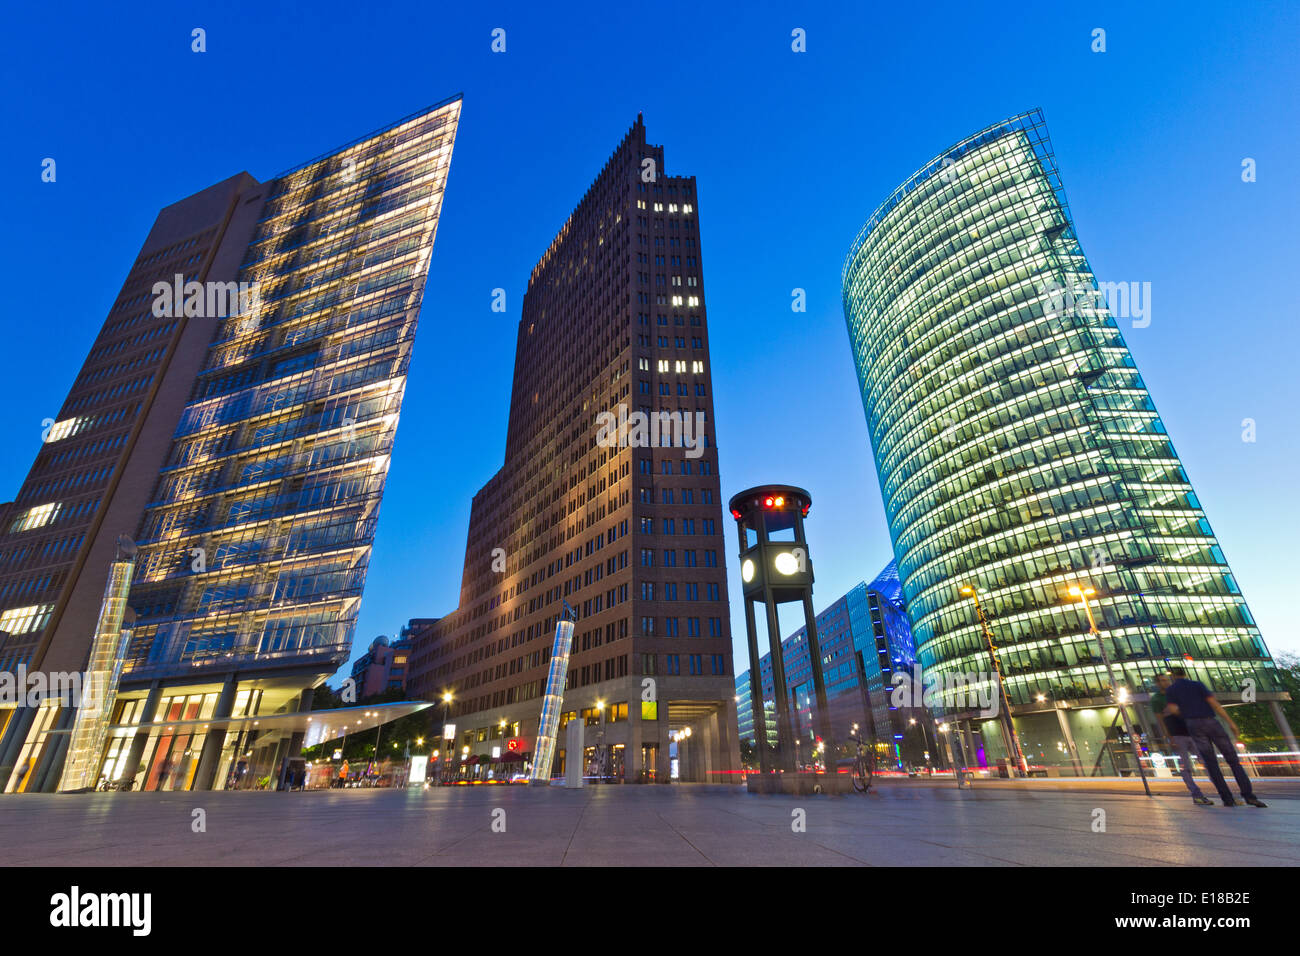 Evening view of the Potsdamer Platz intersection, Berlin, Germany Stock Photo